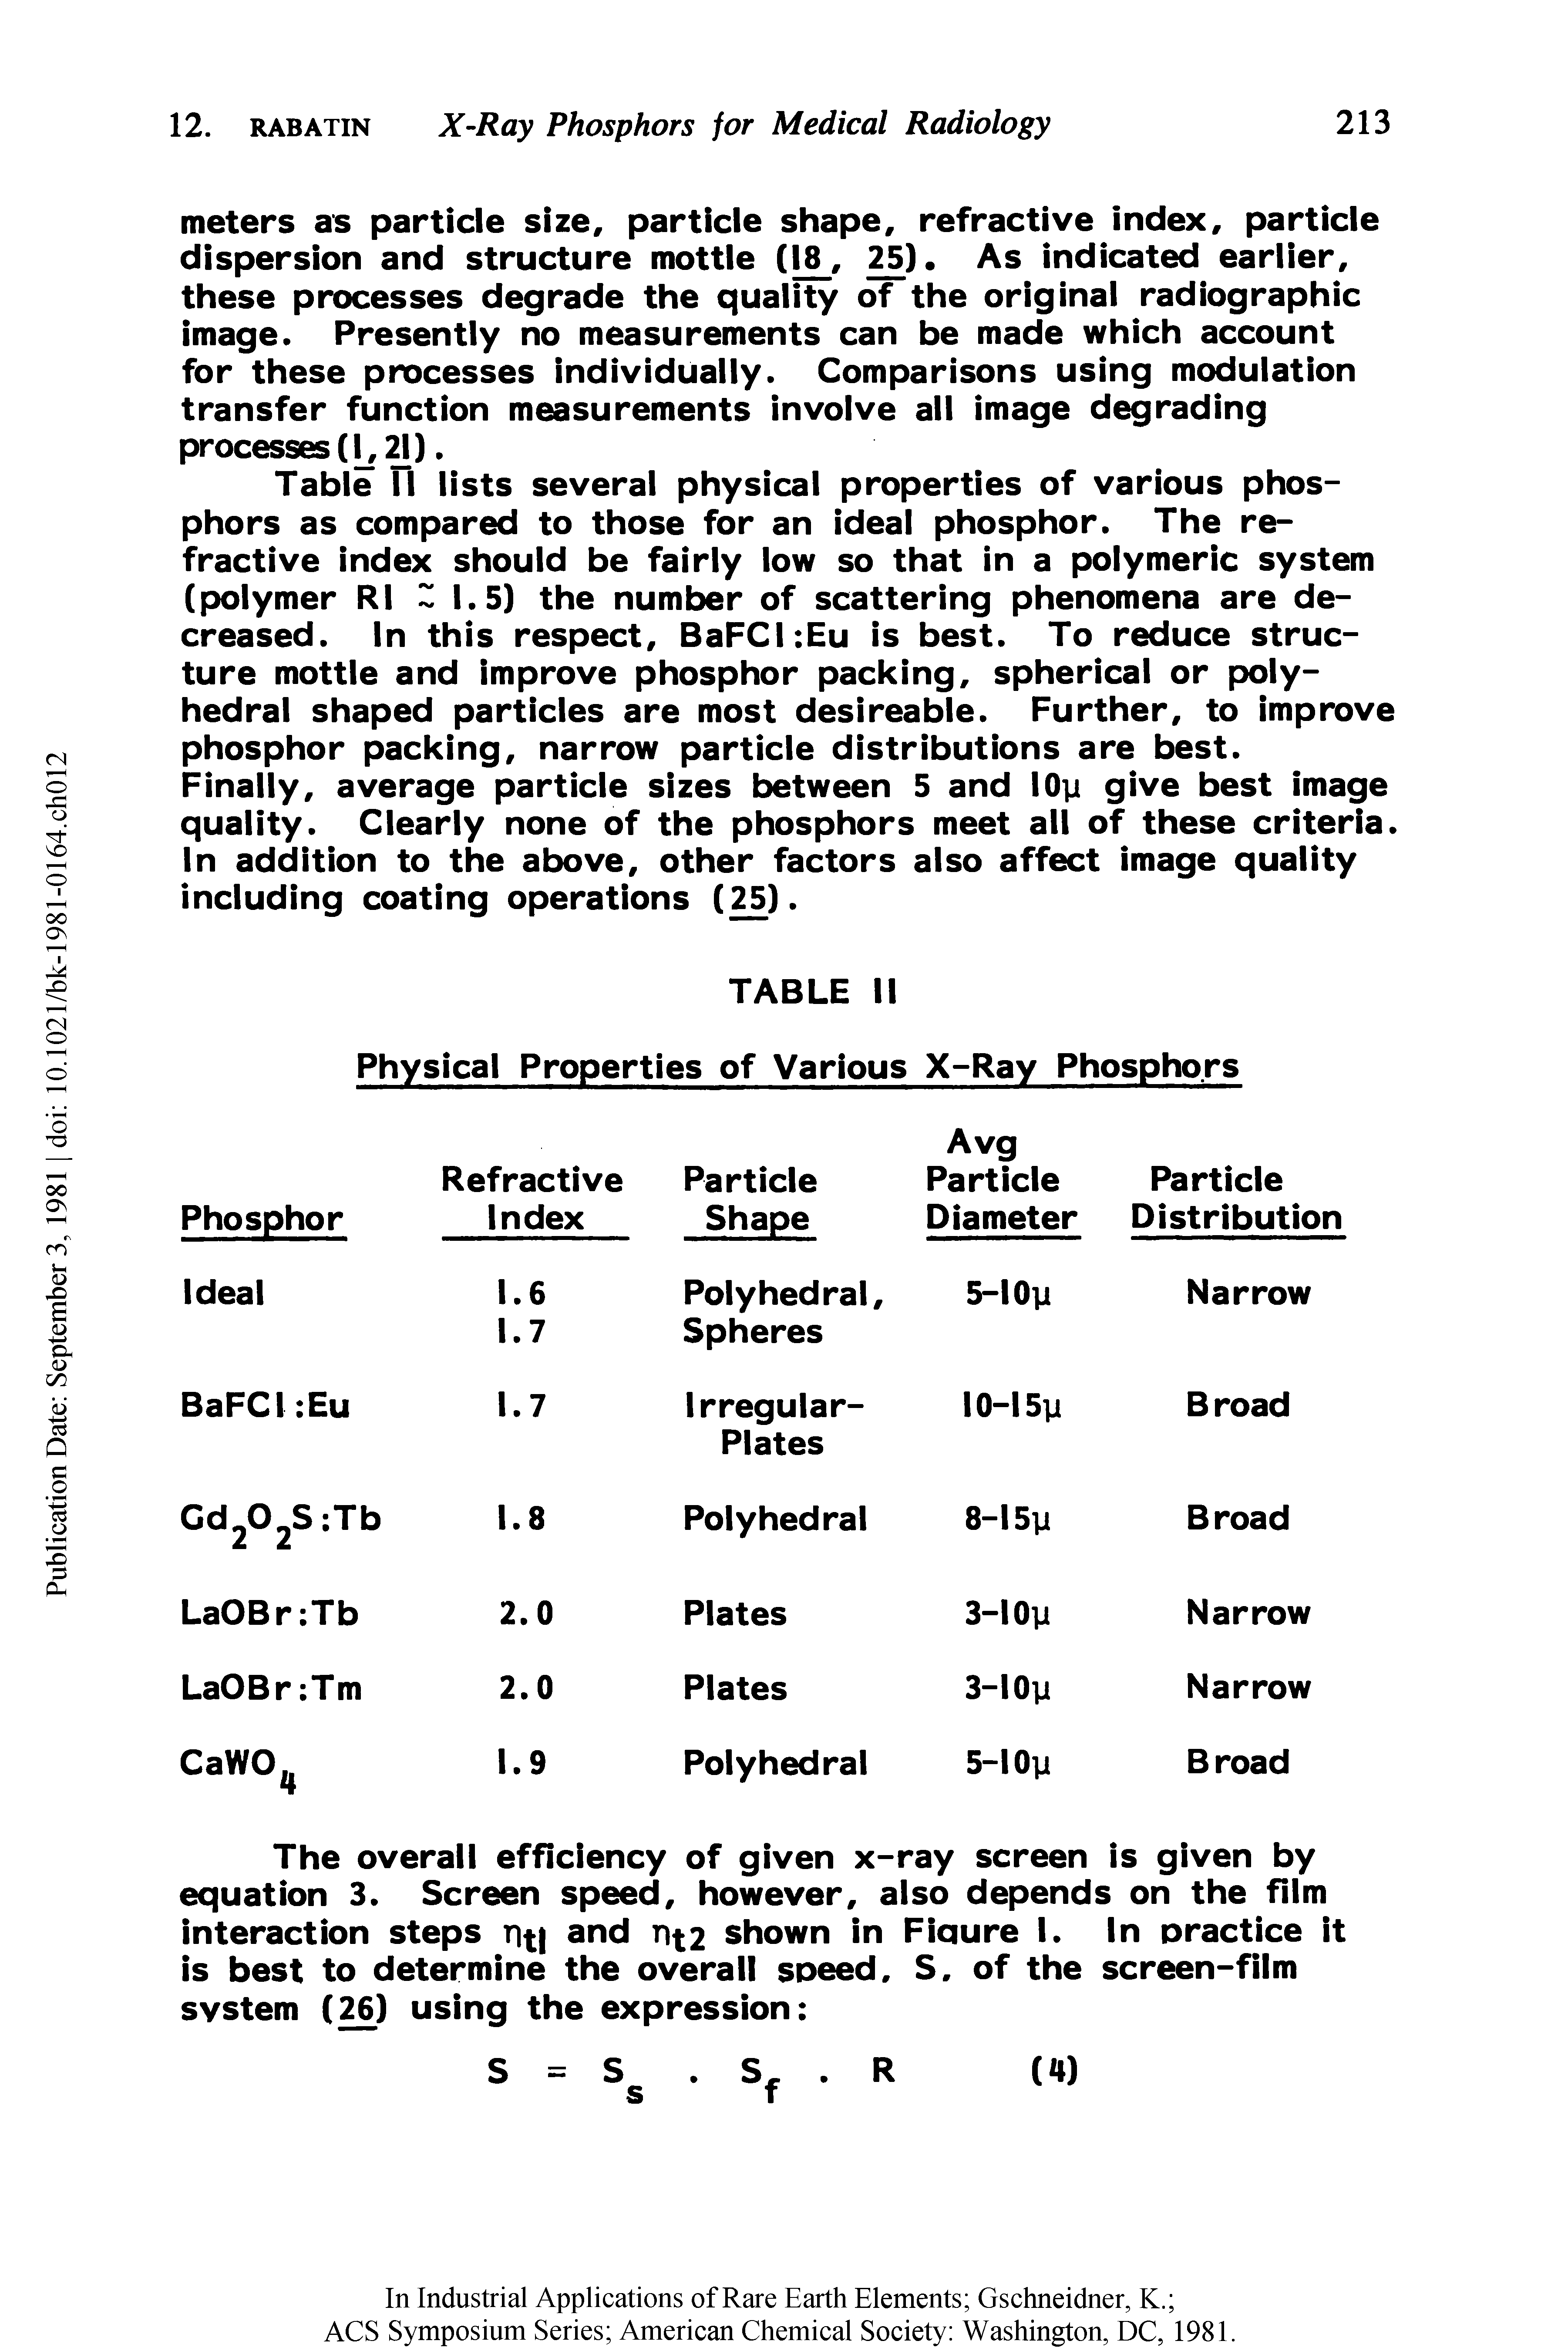 Table II lists several physical properties of various phosphors as compared to those for an ideal phosphor. The refractive index should be fairly low so that in a polymeric system (polymer Rl 1.5) the number of scattering phenomena are decreased. In this respect, BaFCI Eu is best. To reduce structure mottle and improve phosphor packing, spherical or polyhedral shaped particles are most desireable. Further, to improve phosphor packing, narrow particle distributions are best.